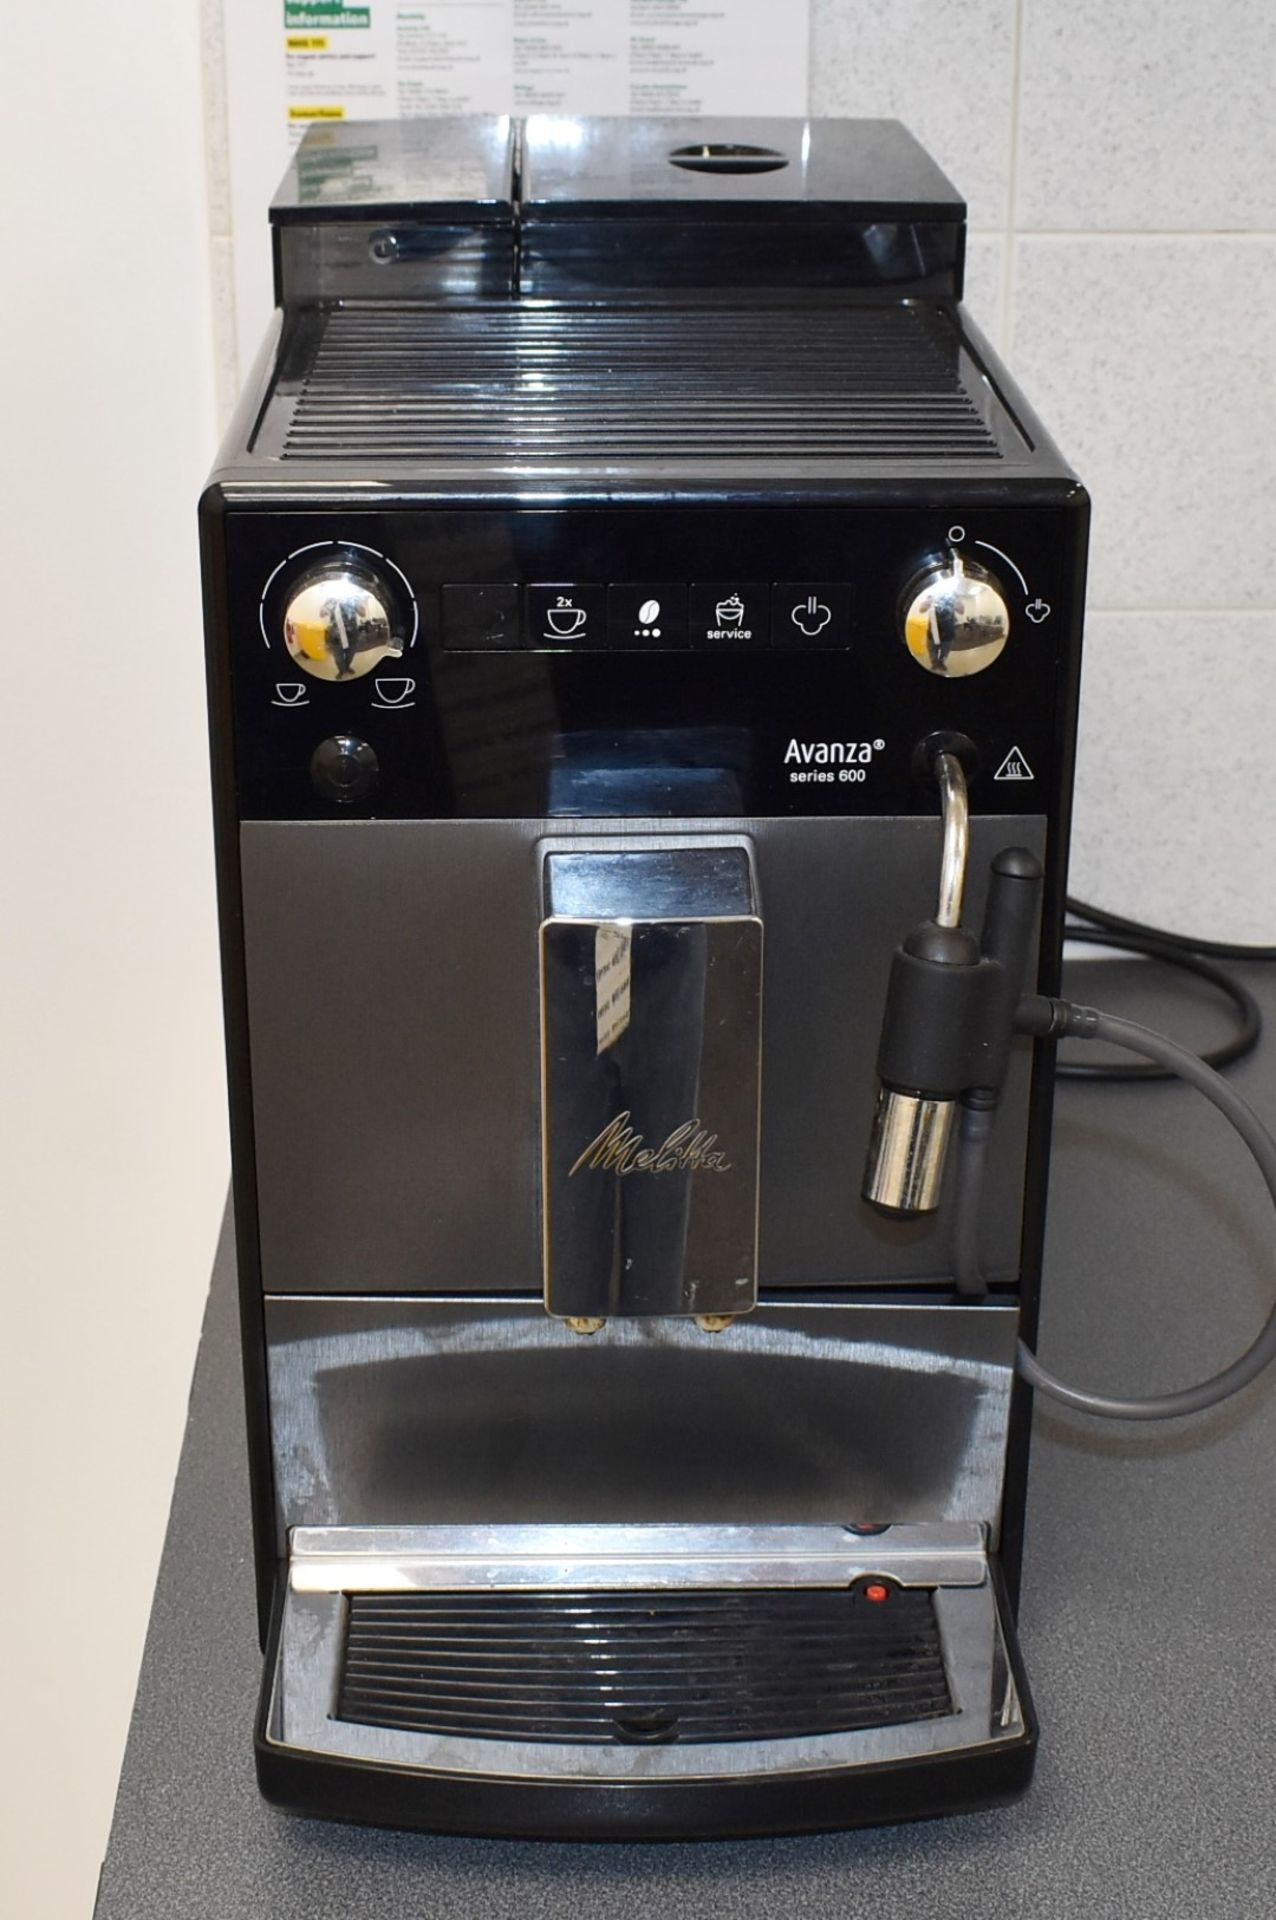 1 x Melitta Avanza Bean to Cup Coffee Machine - Series 600 With Stainless Steel / Black Finish - Image 4 of 4